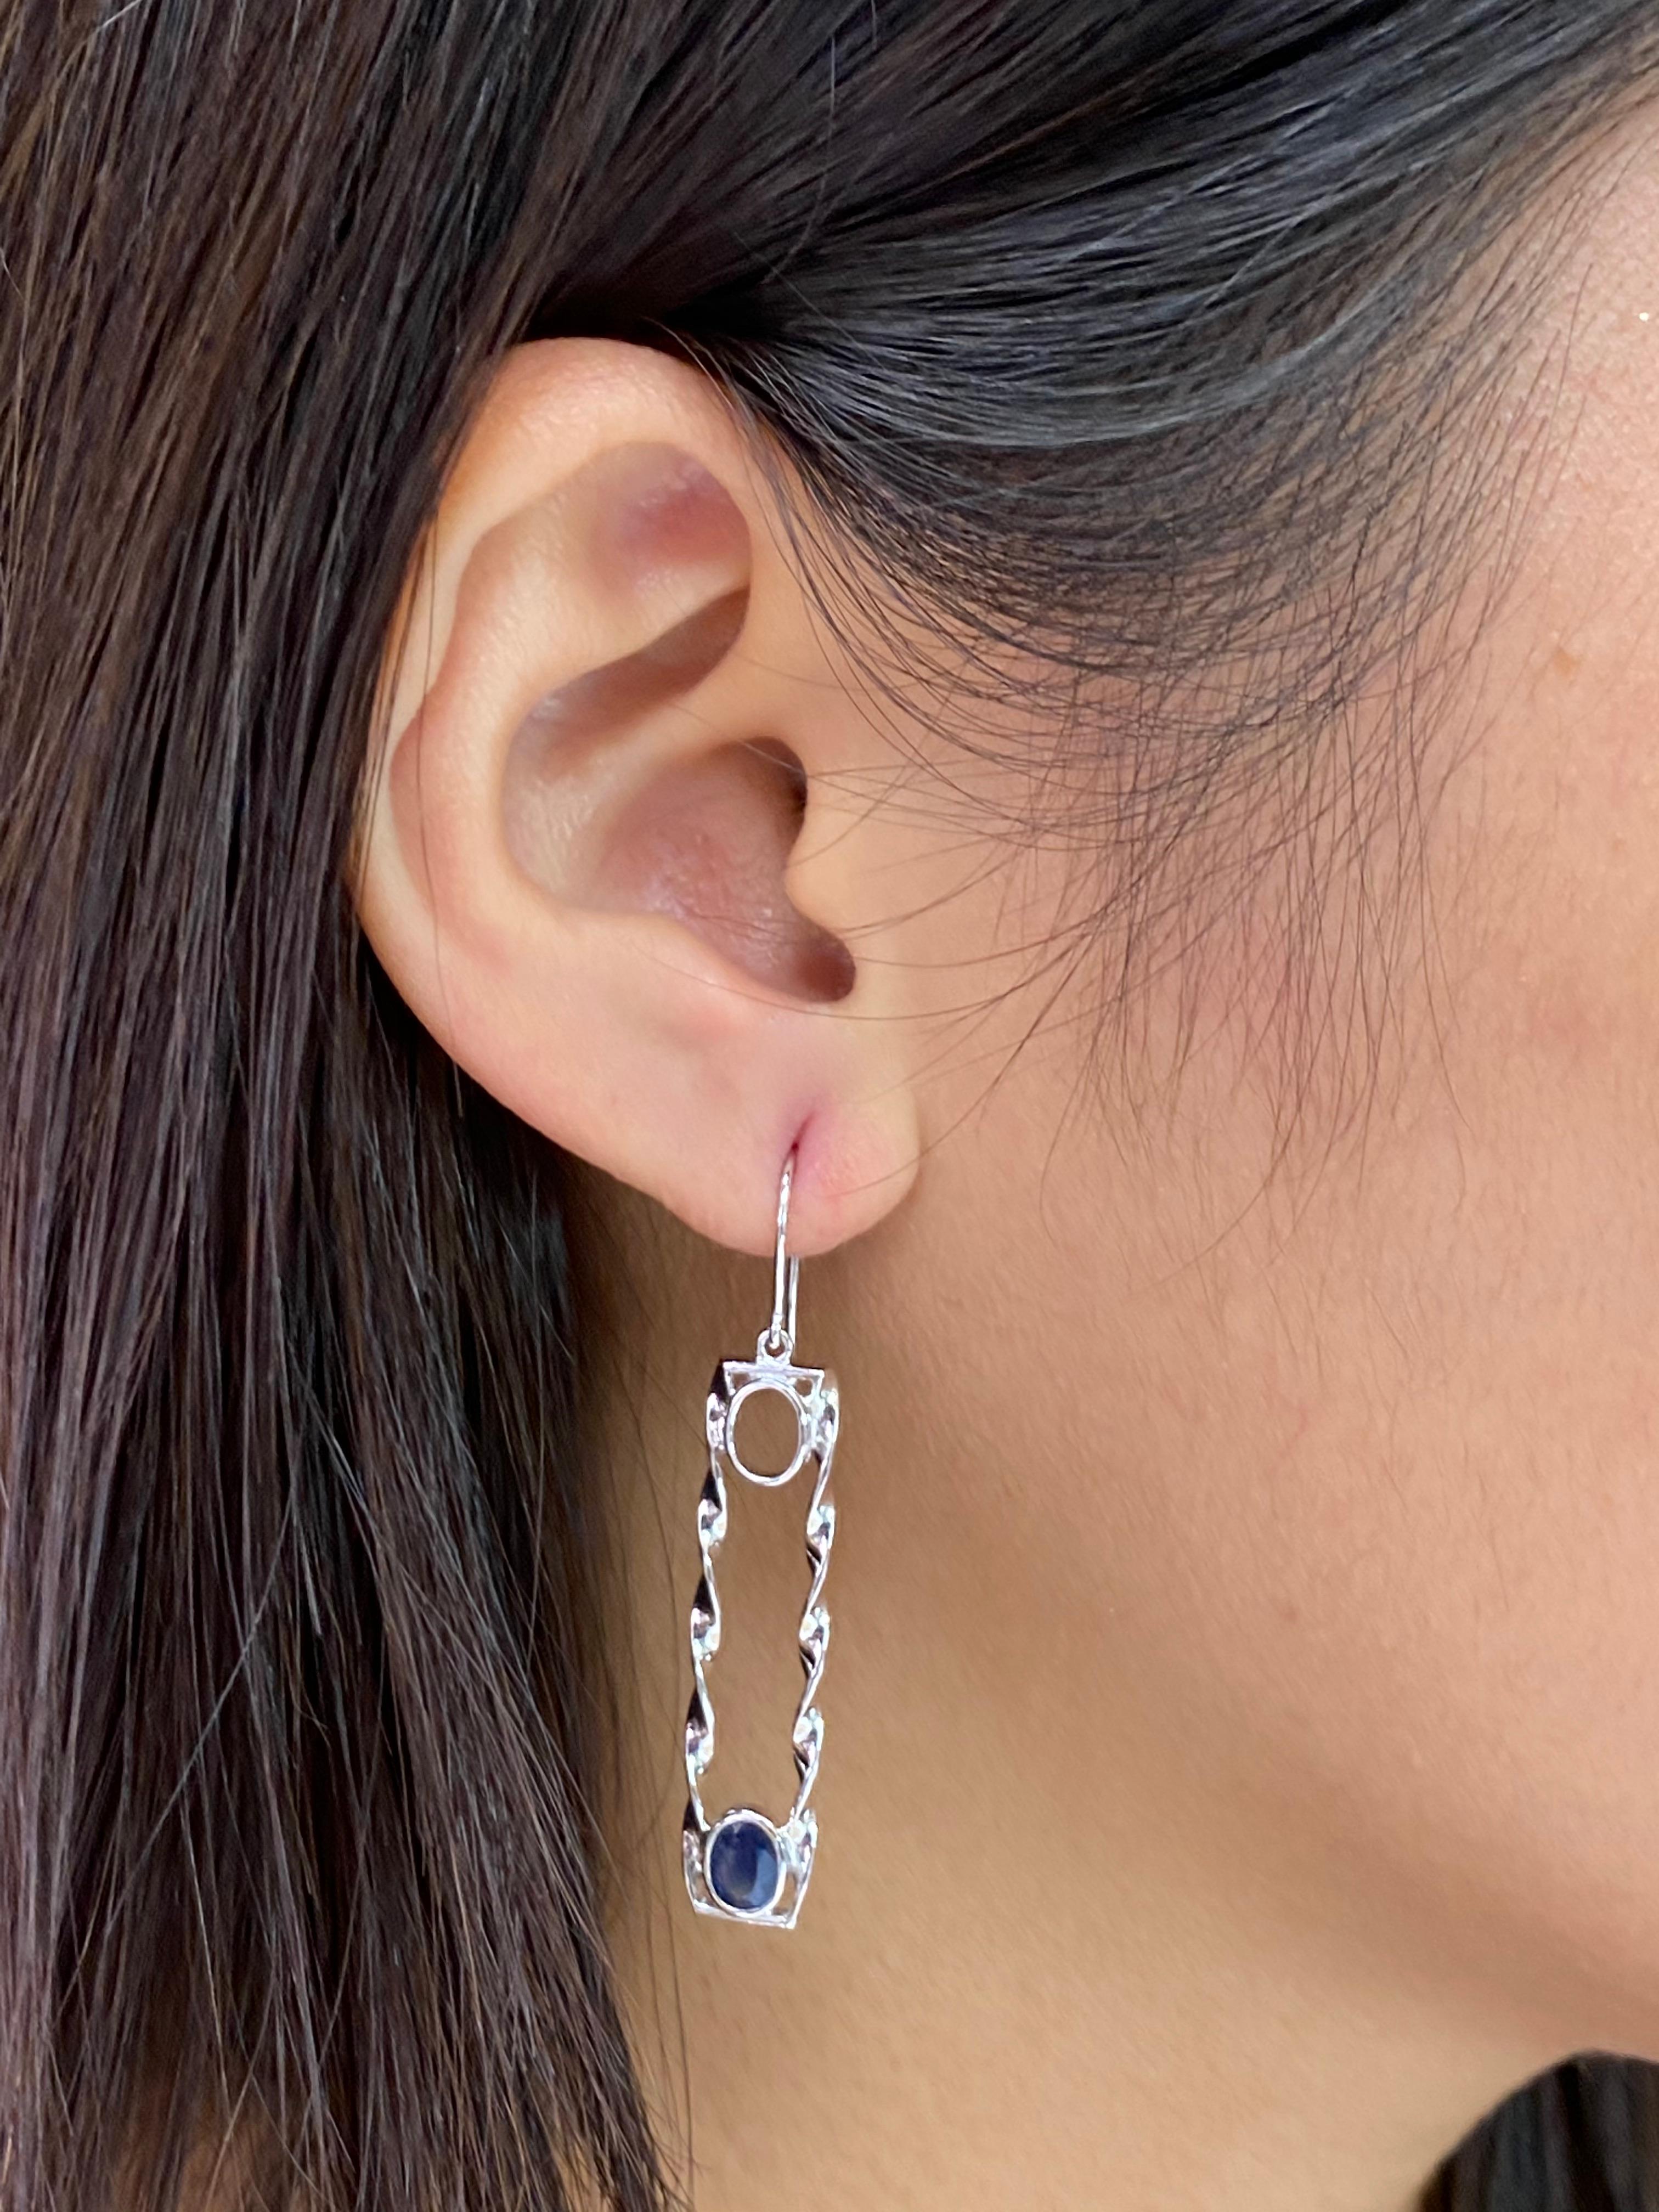 Here is a very nice pair of Sapphire drop earrings. The design is superb. The earrings are set in 18k white gold. Unique with a twist. The 2 oval shaped sapphires weight a total of 1.45cts. You can spot these drop earrings from far away. You can't